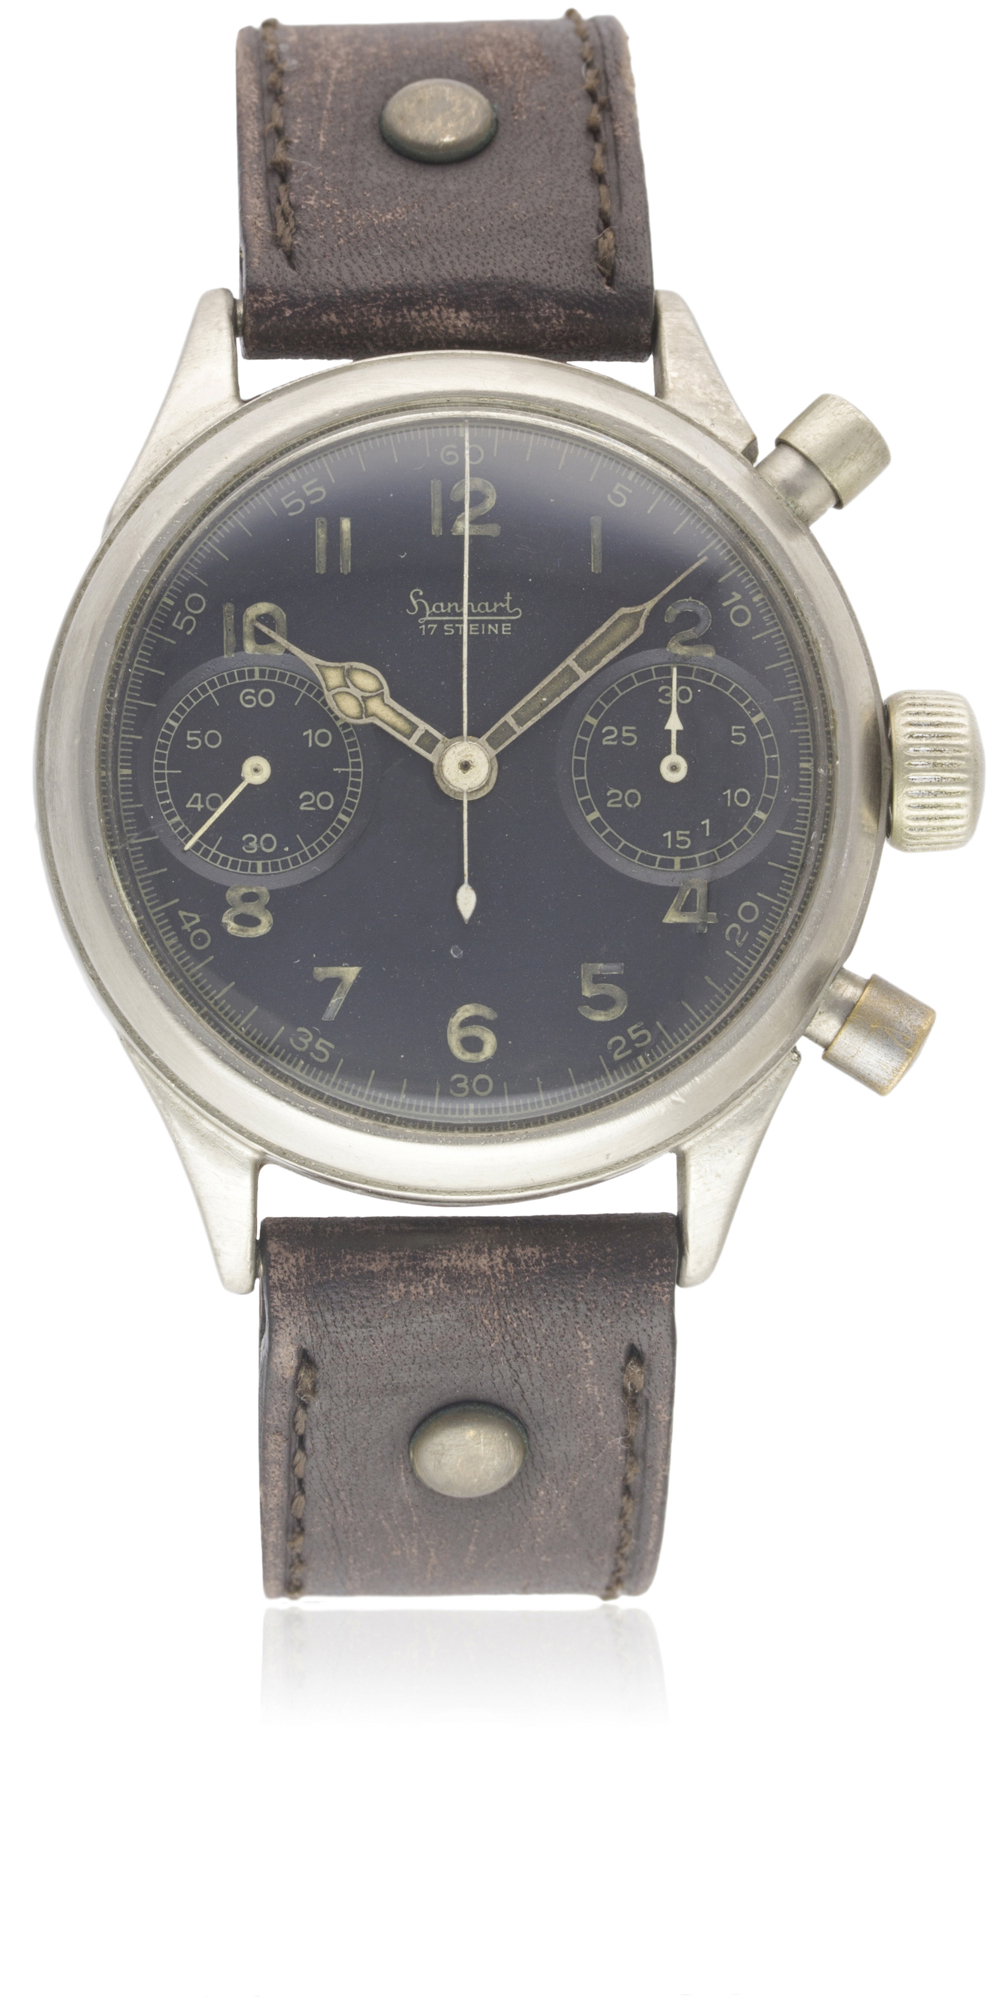 A RARE GENTLEMAN'S NICKEL PLATED GERMAN MILITARY HANHART LUFTWAFFE PILOTS FLYBACK CHRONOGRAPH - Image 2 of 11